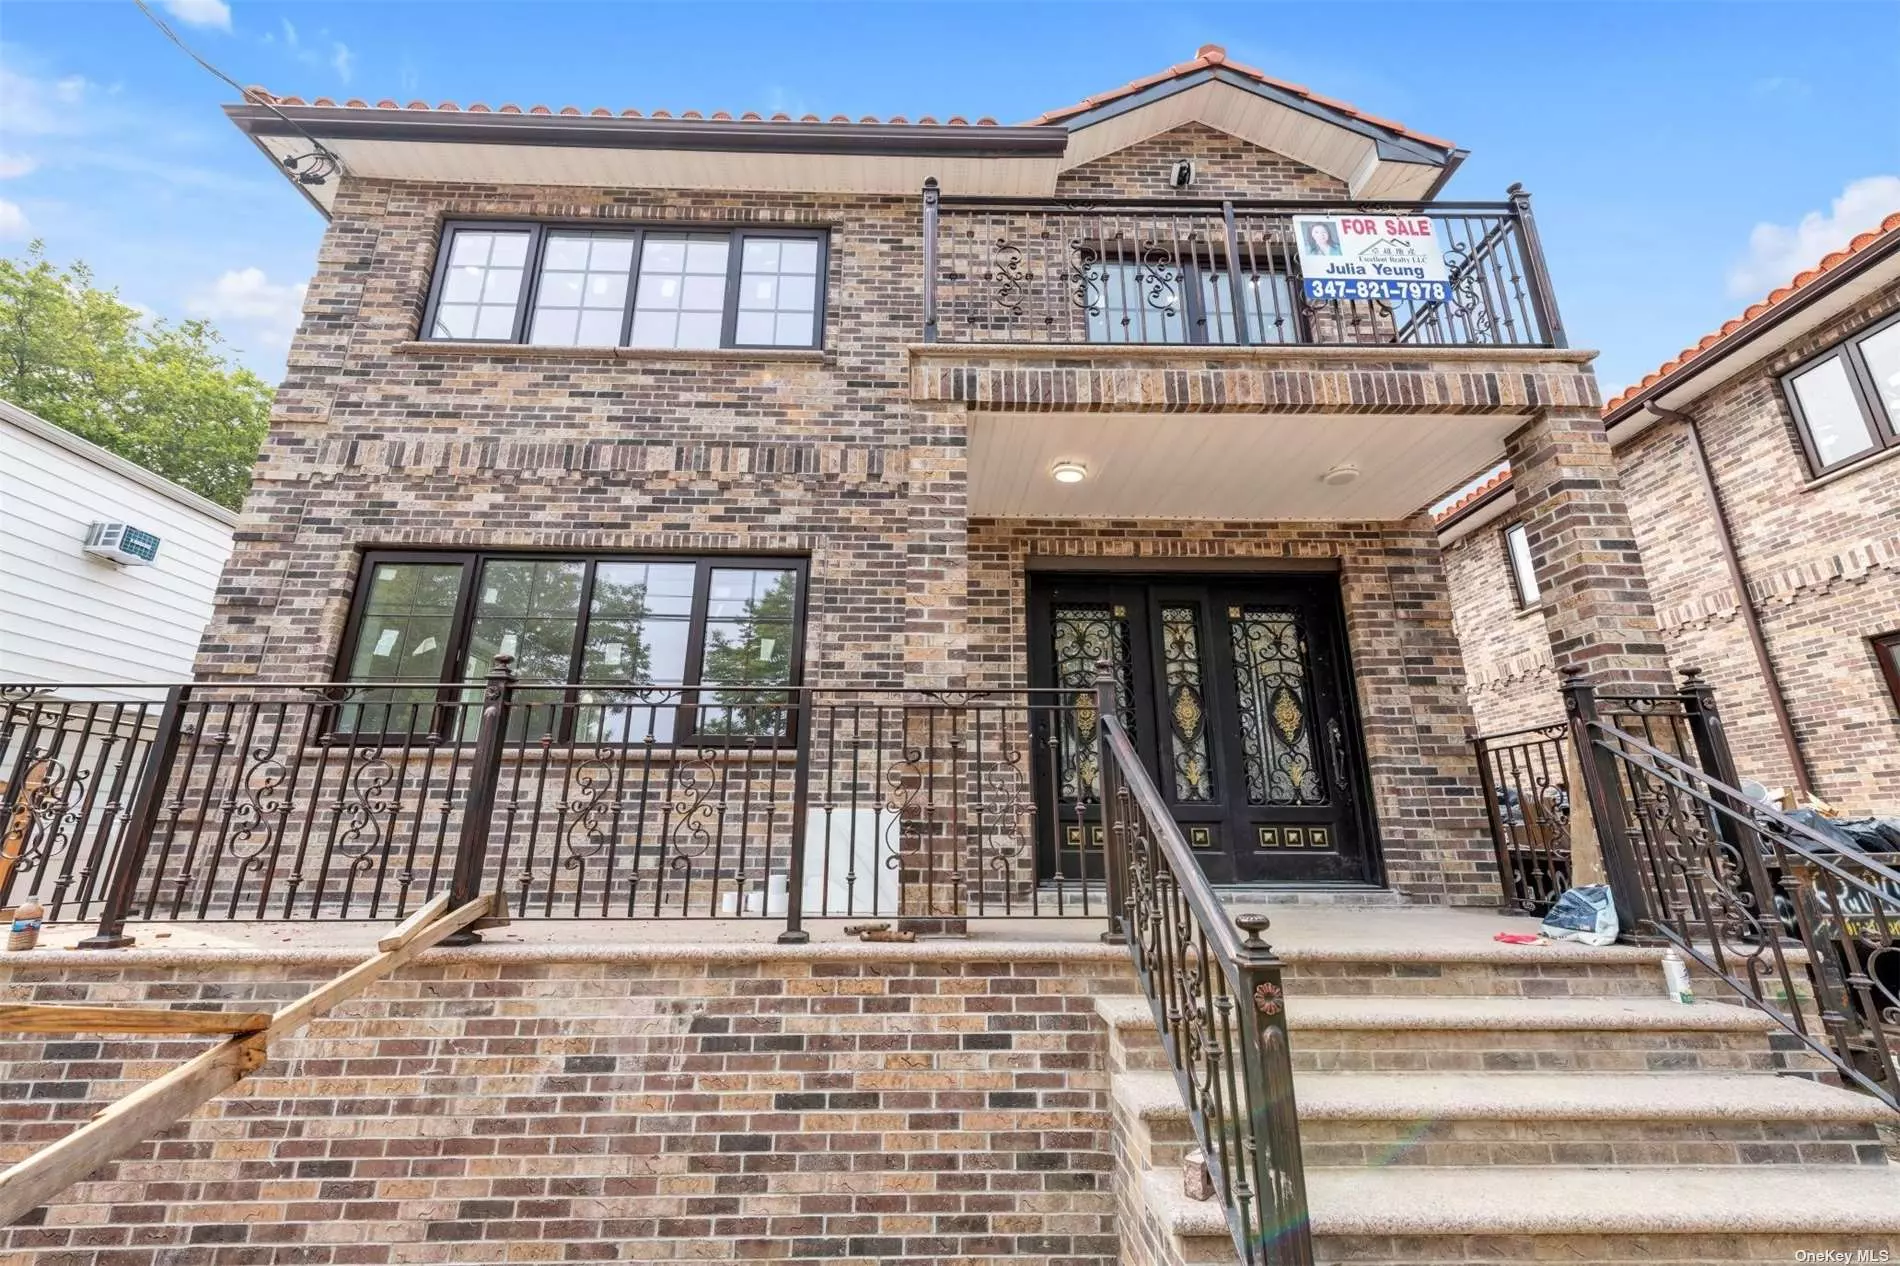 Completely Brand new brick legal Two family house in Bayside. It Features total 8 Bedrooms and 5 Baths. Each floor has 4 bedrooms and 2 full baths . Building Size is 27x50. Big front deck on the first floor .Beautifully designed Kitchen and Stainless Steel Appliances, Hardwood Floor Throughout, finished basement with bath, it has separated entrance to backyard.  bus Q13. Q12 direct to flushing. Express Bus Direct to Manhattan. Detached Garage . 26 school district.